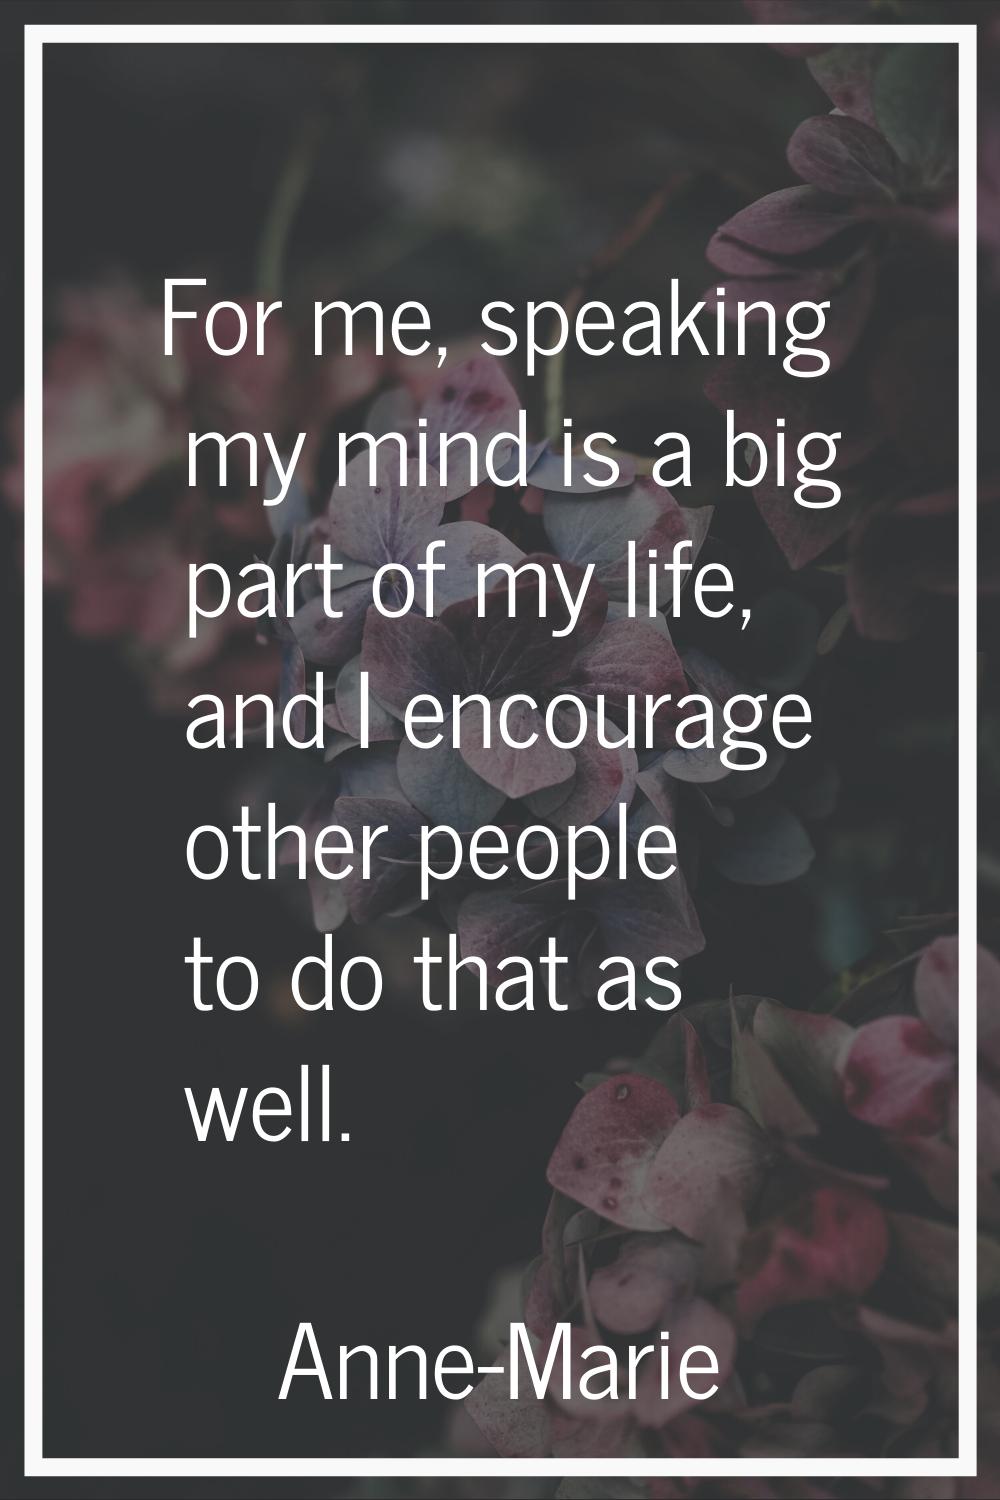 For me, speaking my mind is a big part of my life, and I encourage other people to do that as well.